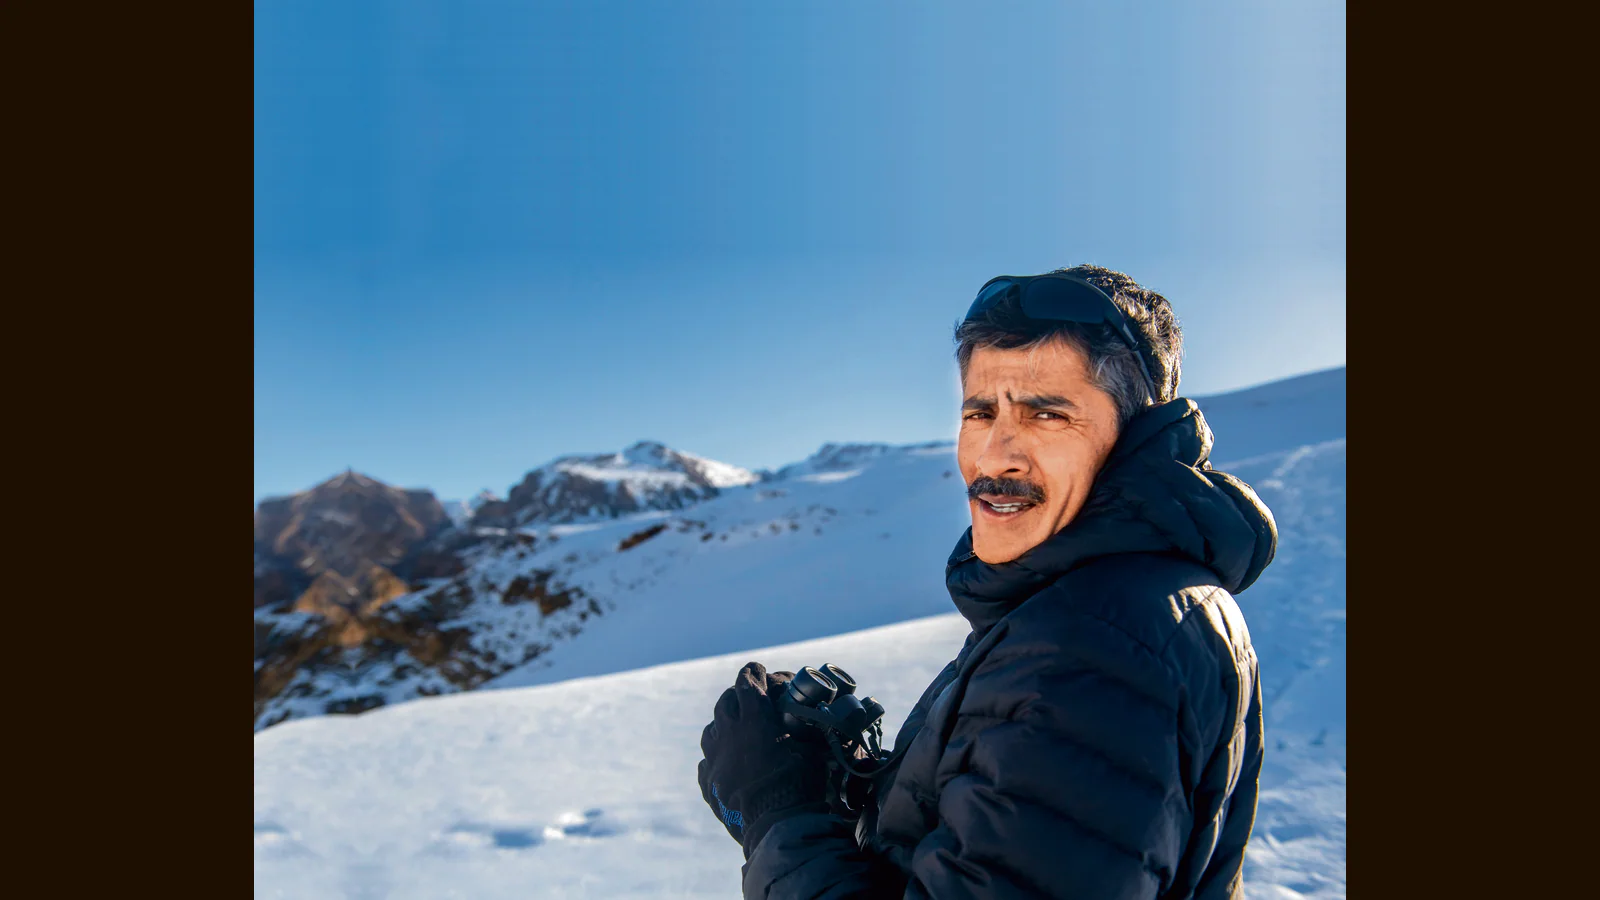 Spotted in the wild: A Wknd interview with Charudutt Mishra, snow leopard man